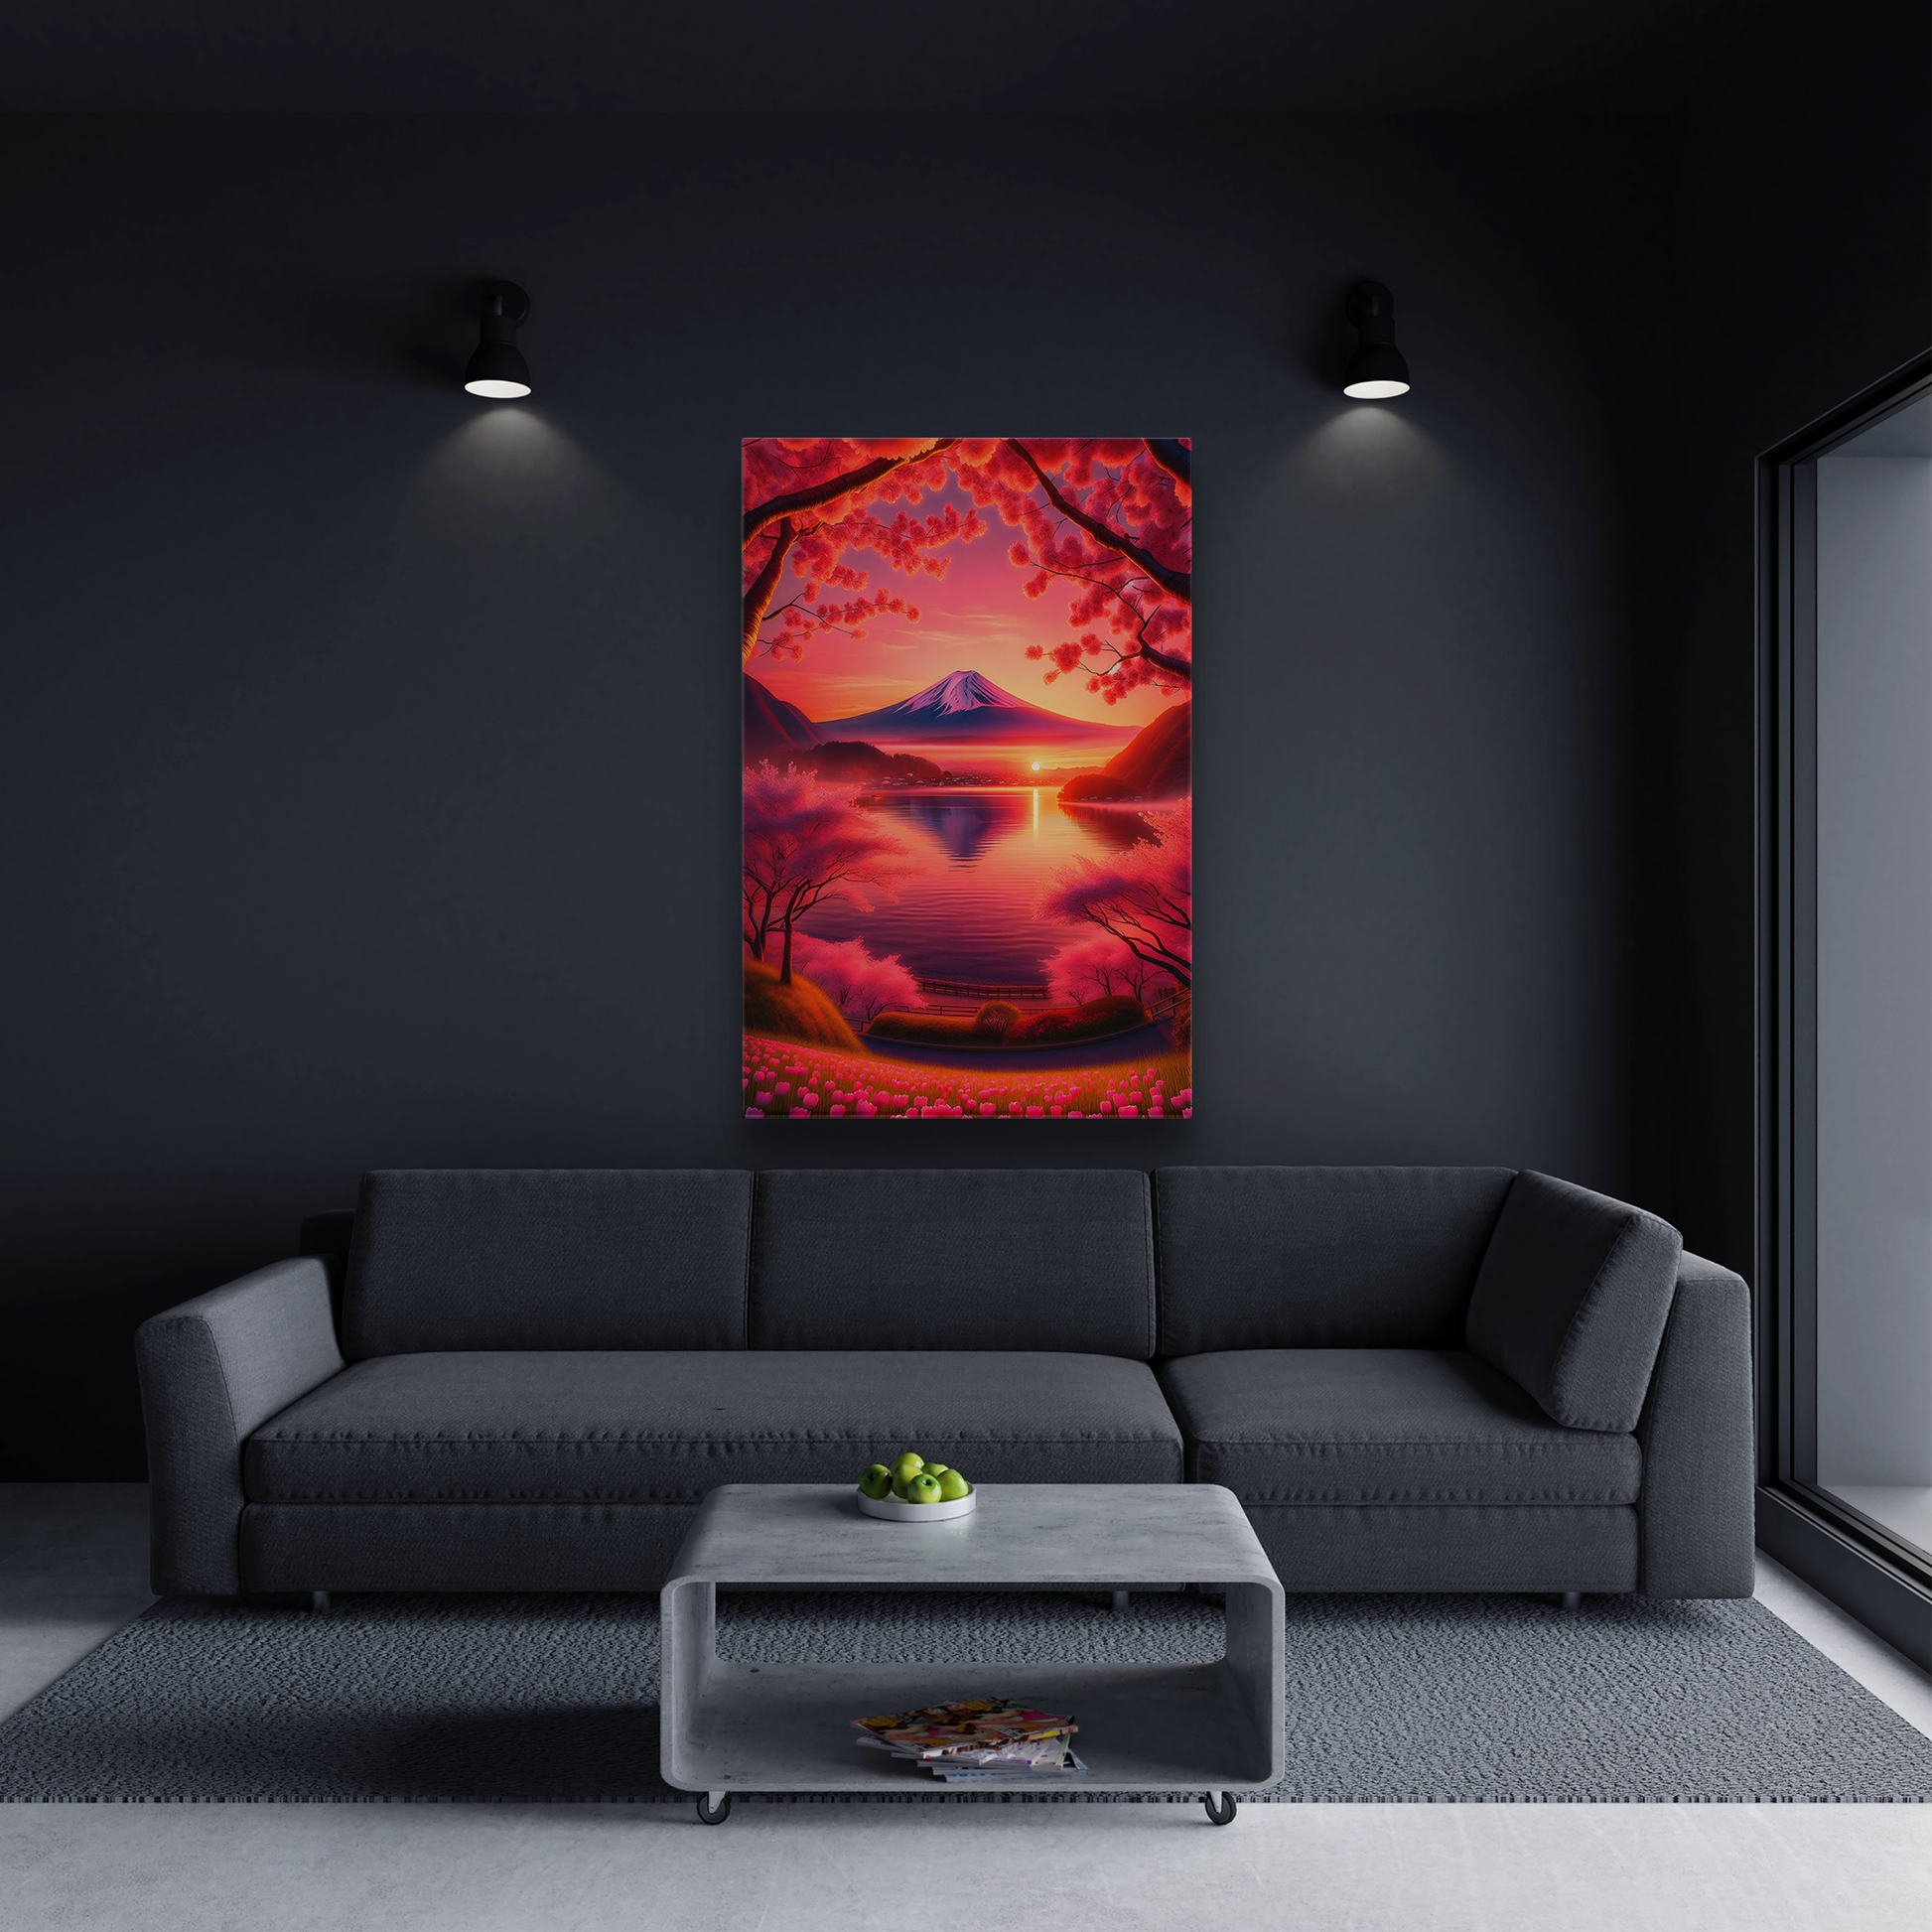 Crimson Fuji Dawn (Canvas)Crimson Fuji Dawn (Canvas  Matte finish, stretched, with a depth of 1.25 inches)
RimaGallery canvases - ethically produced art to elevate your space. Sustainably souRimaGallery